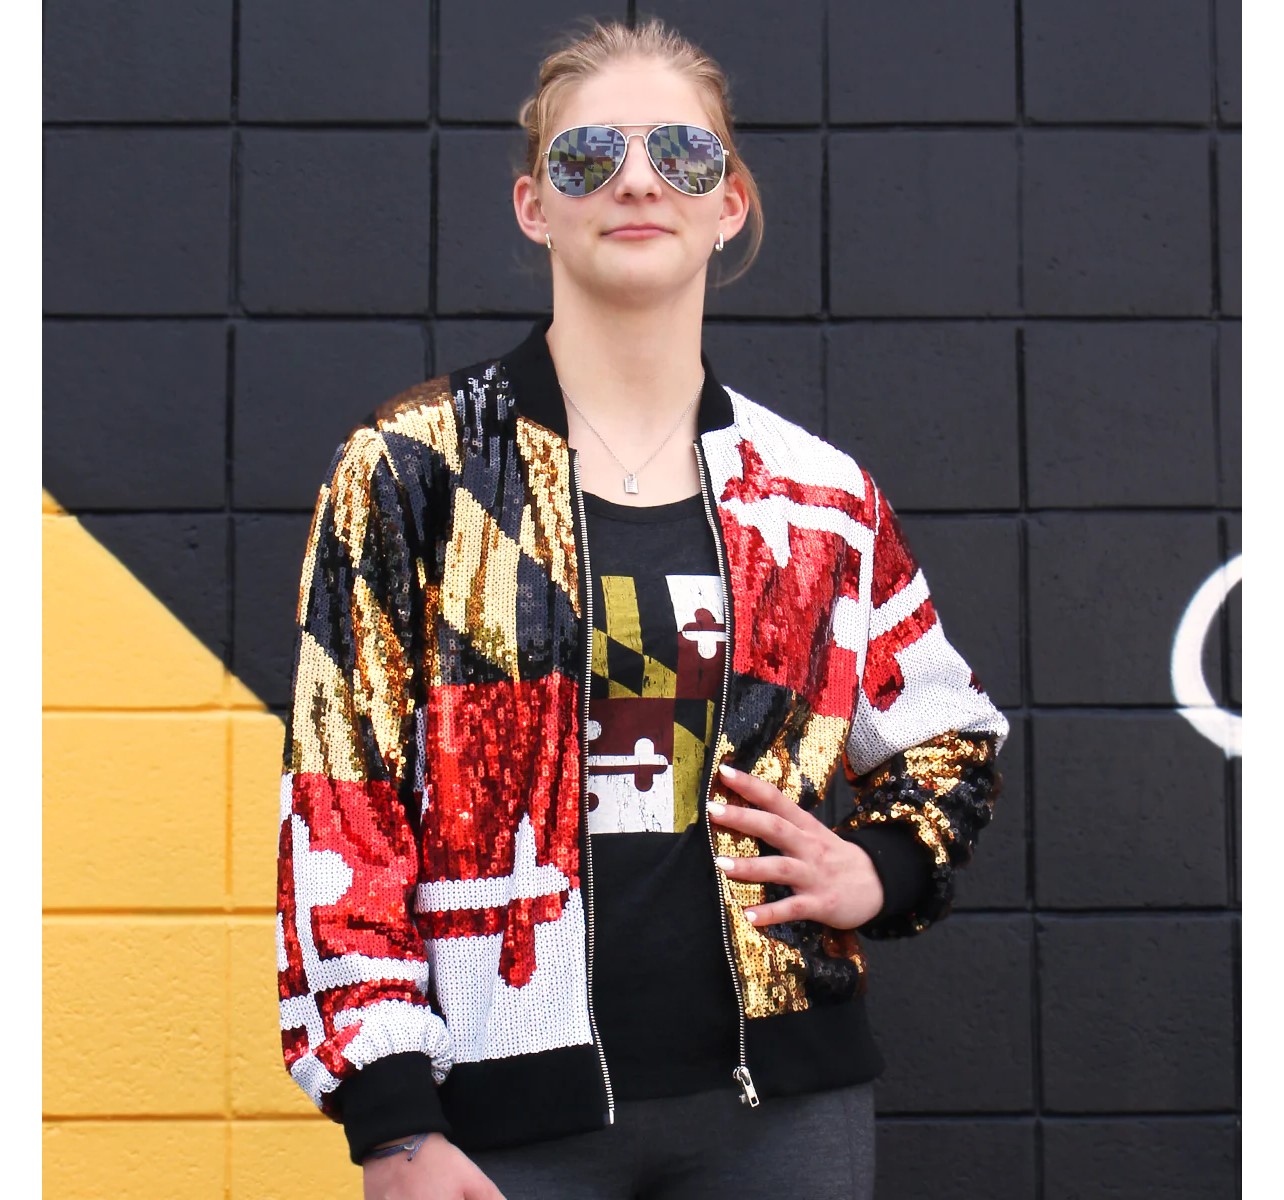 Route One apparel sells clothes, jewelry, home décor and kitchenware with a Maryland spin. But its top sellers are the Maryland flag sequin jackets.